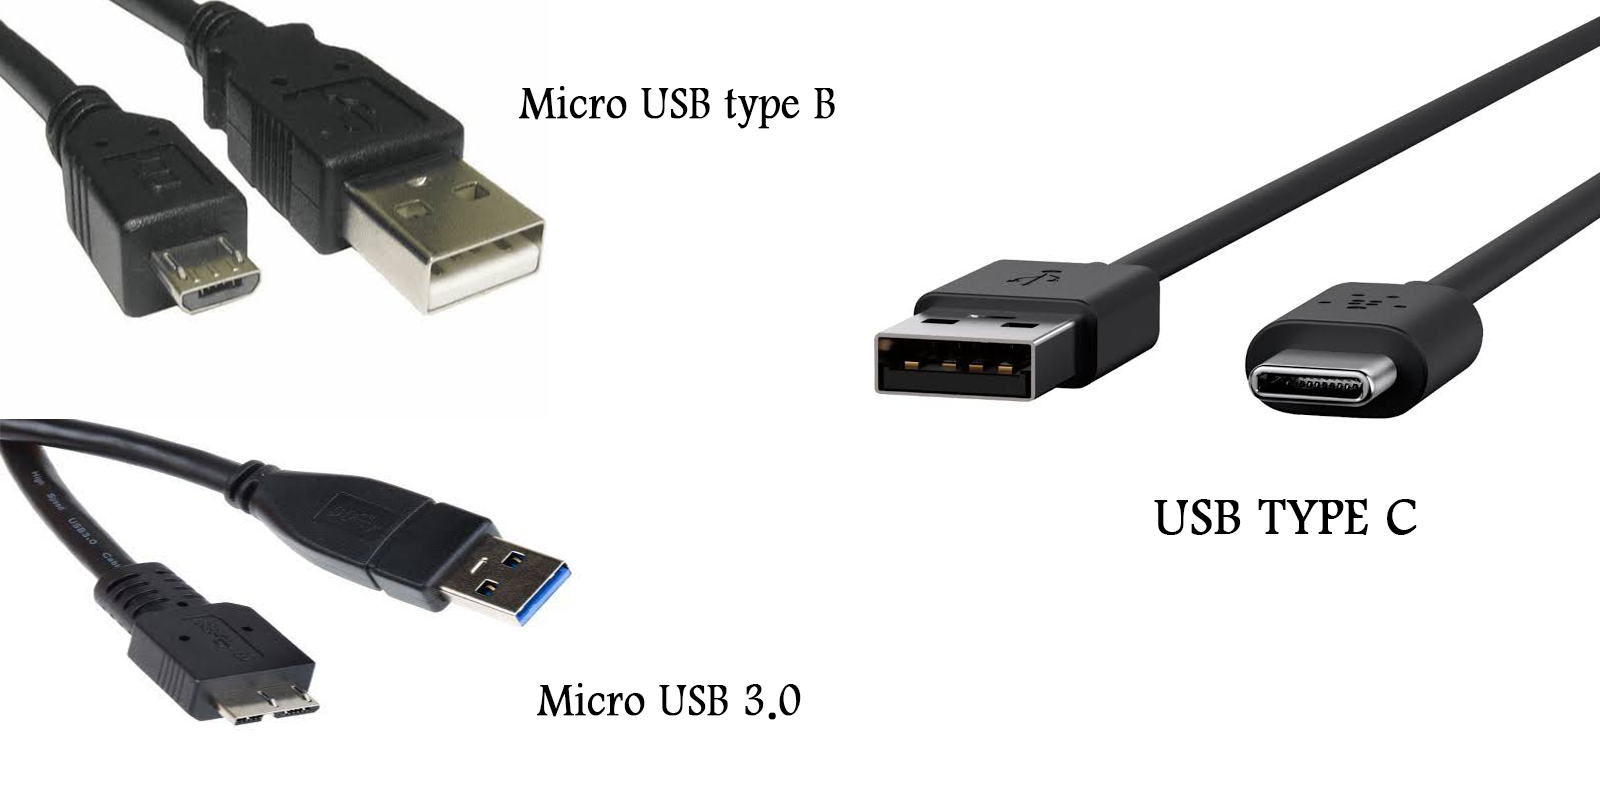 Micro USB vs USB type C /type A /type B - smartphone accessories review